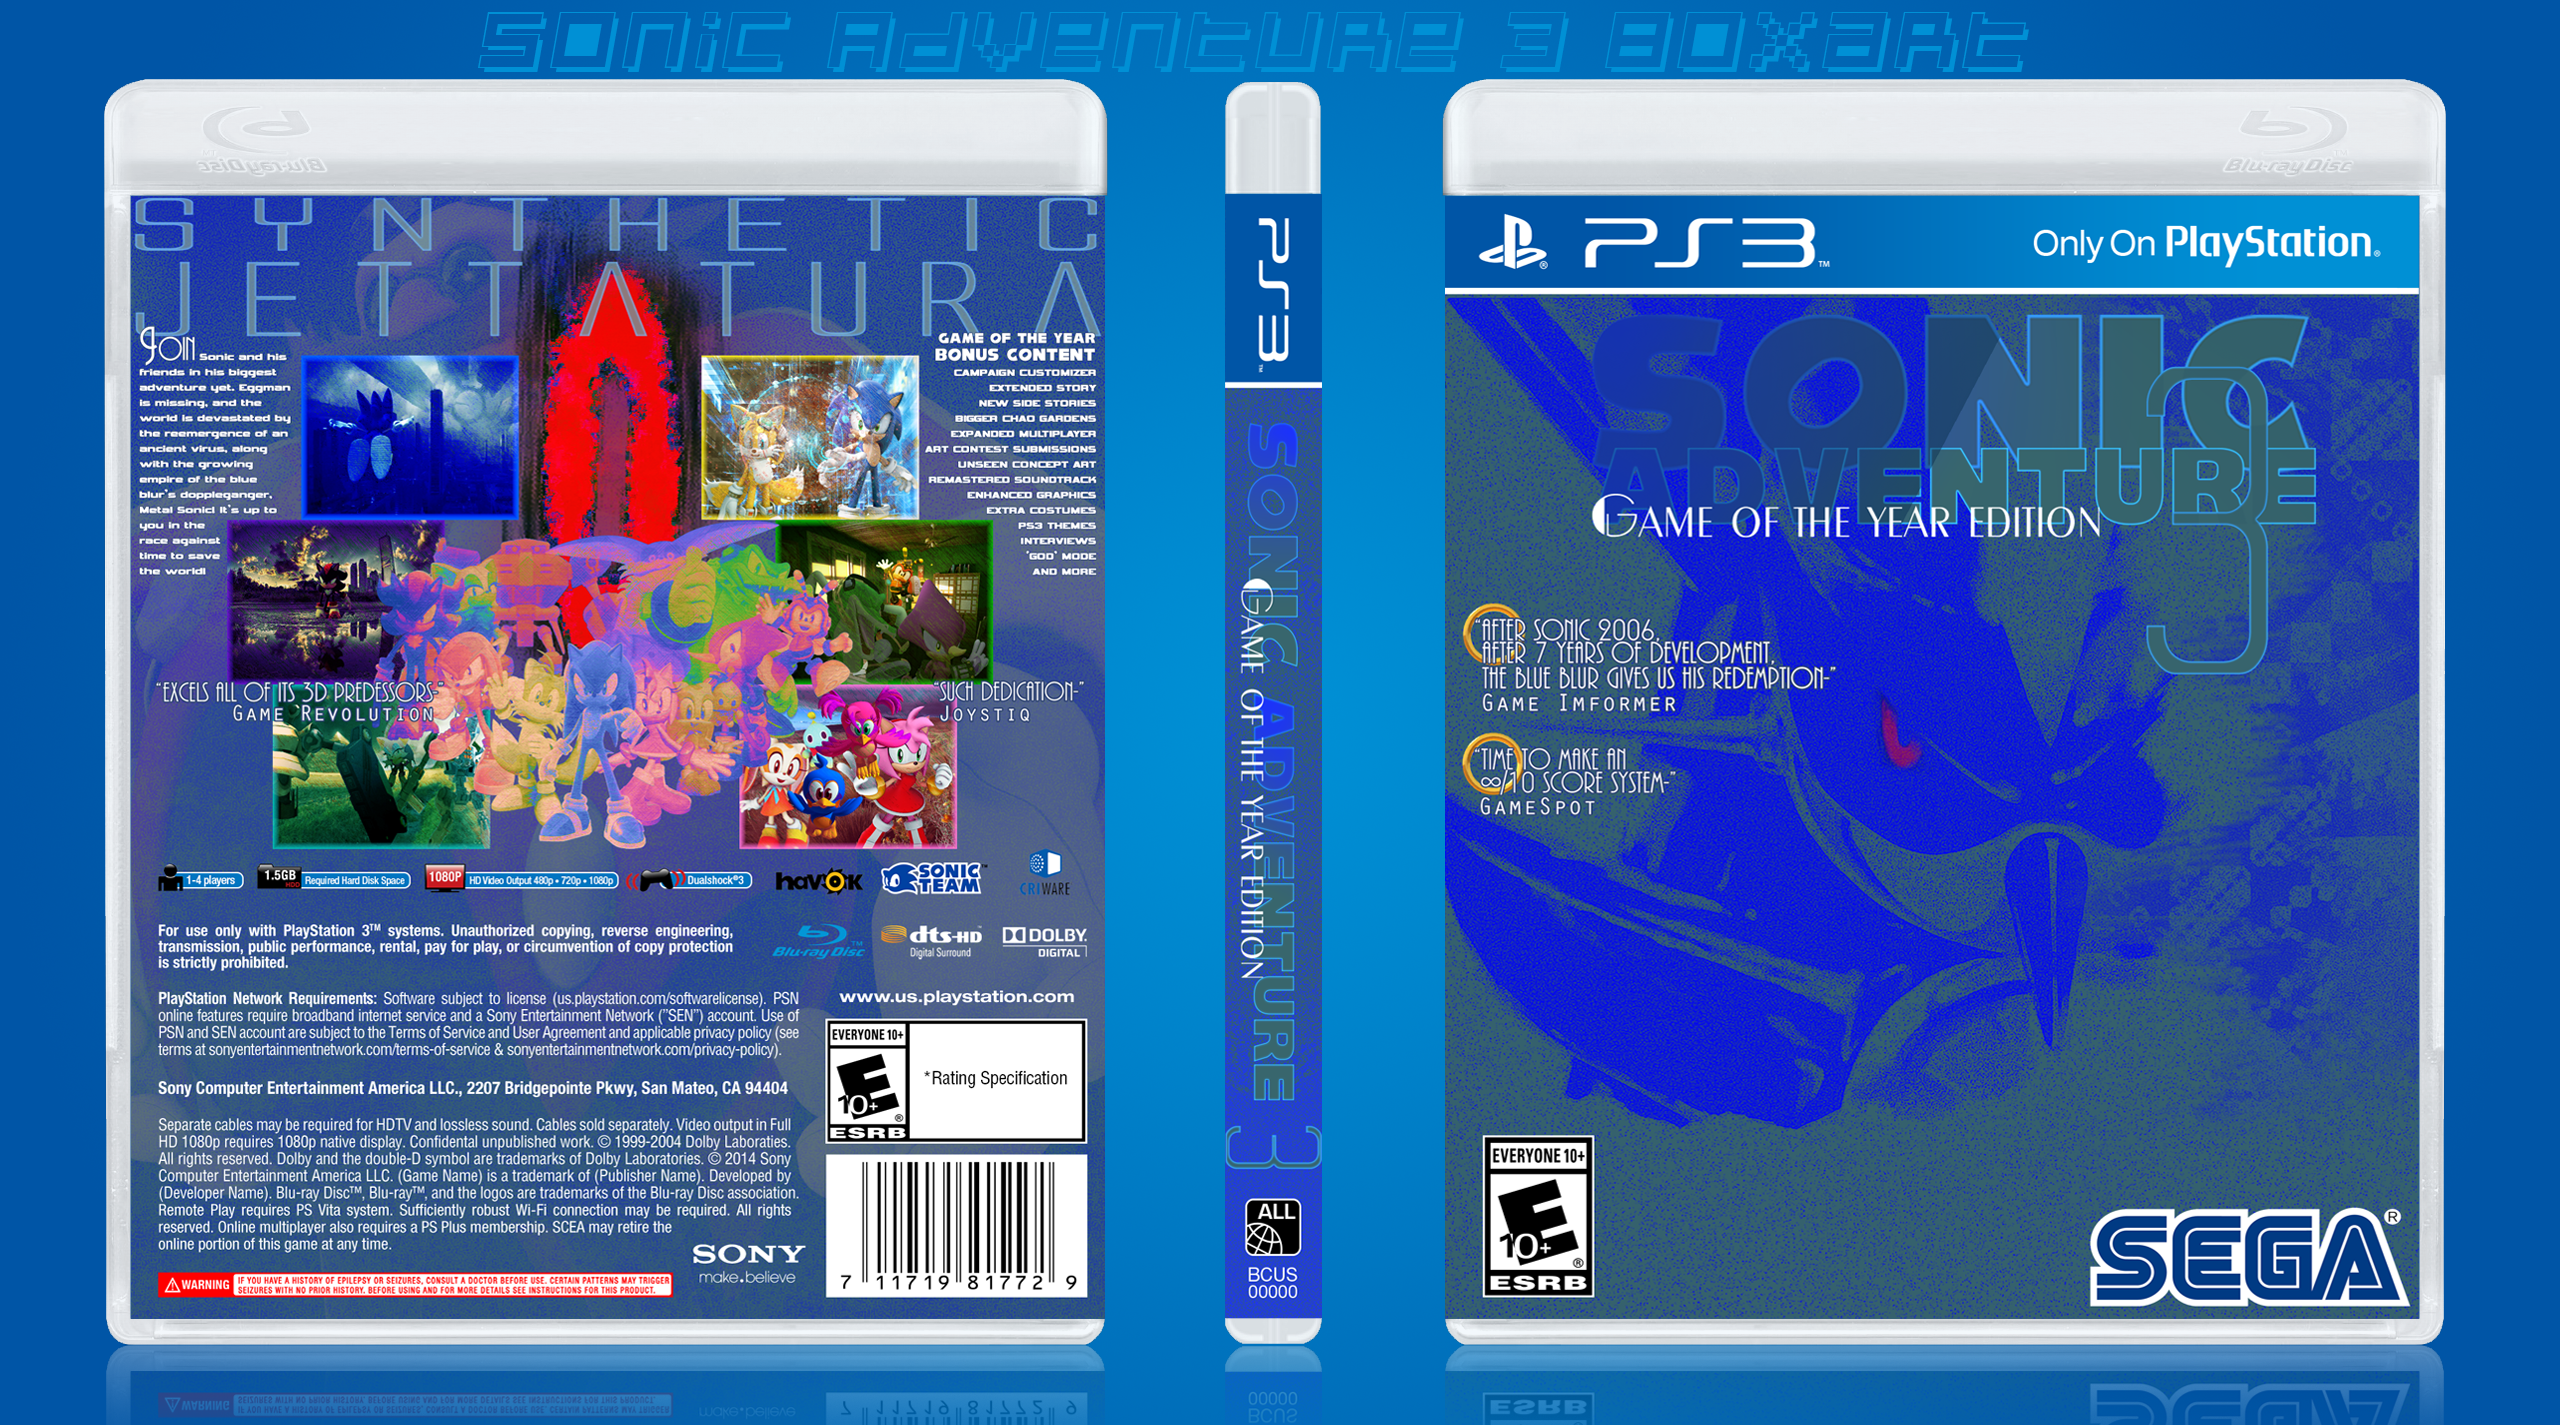 Sonic Adventure 3: Game of the Year Edition box cover